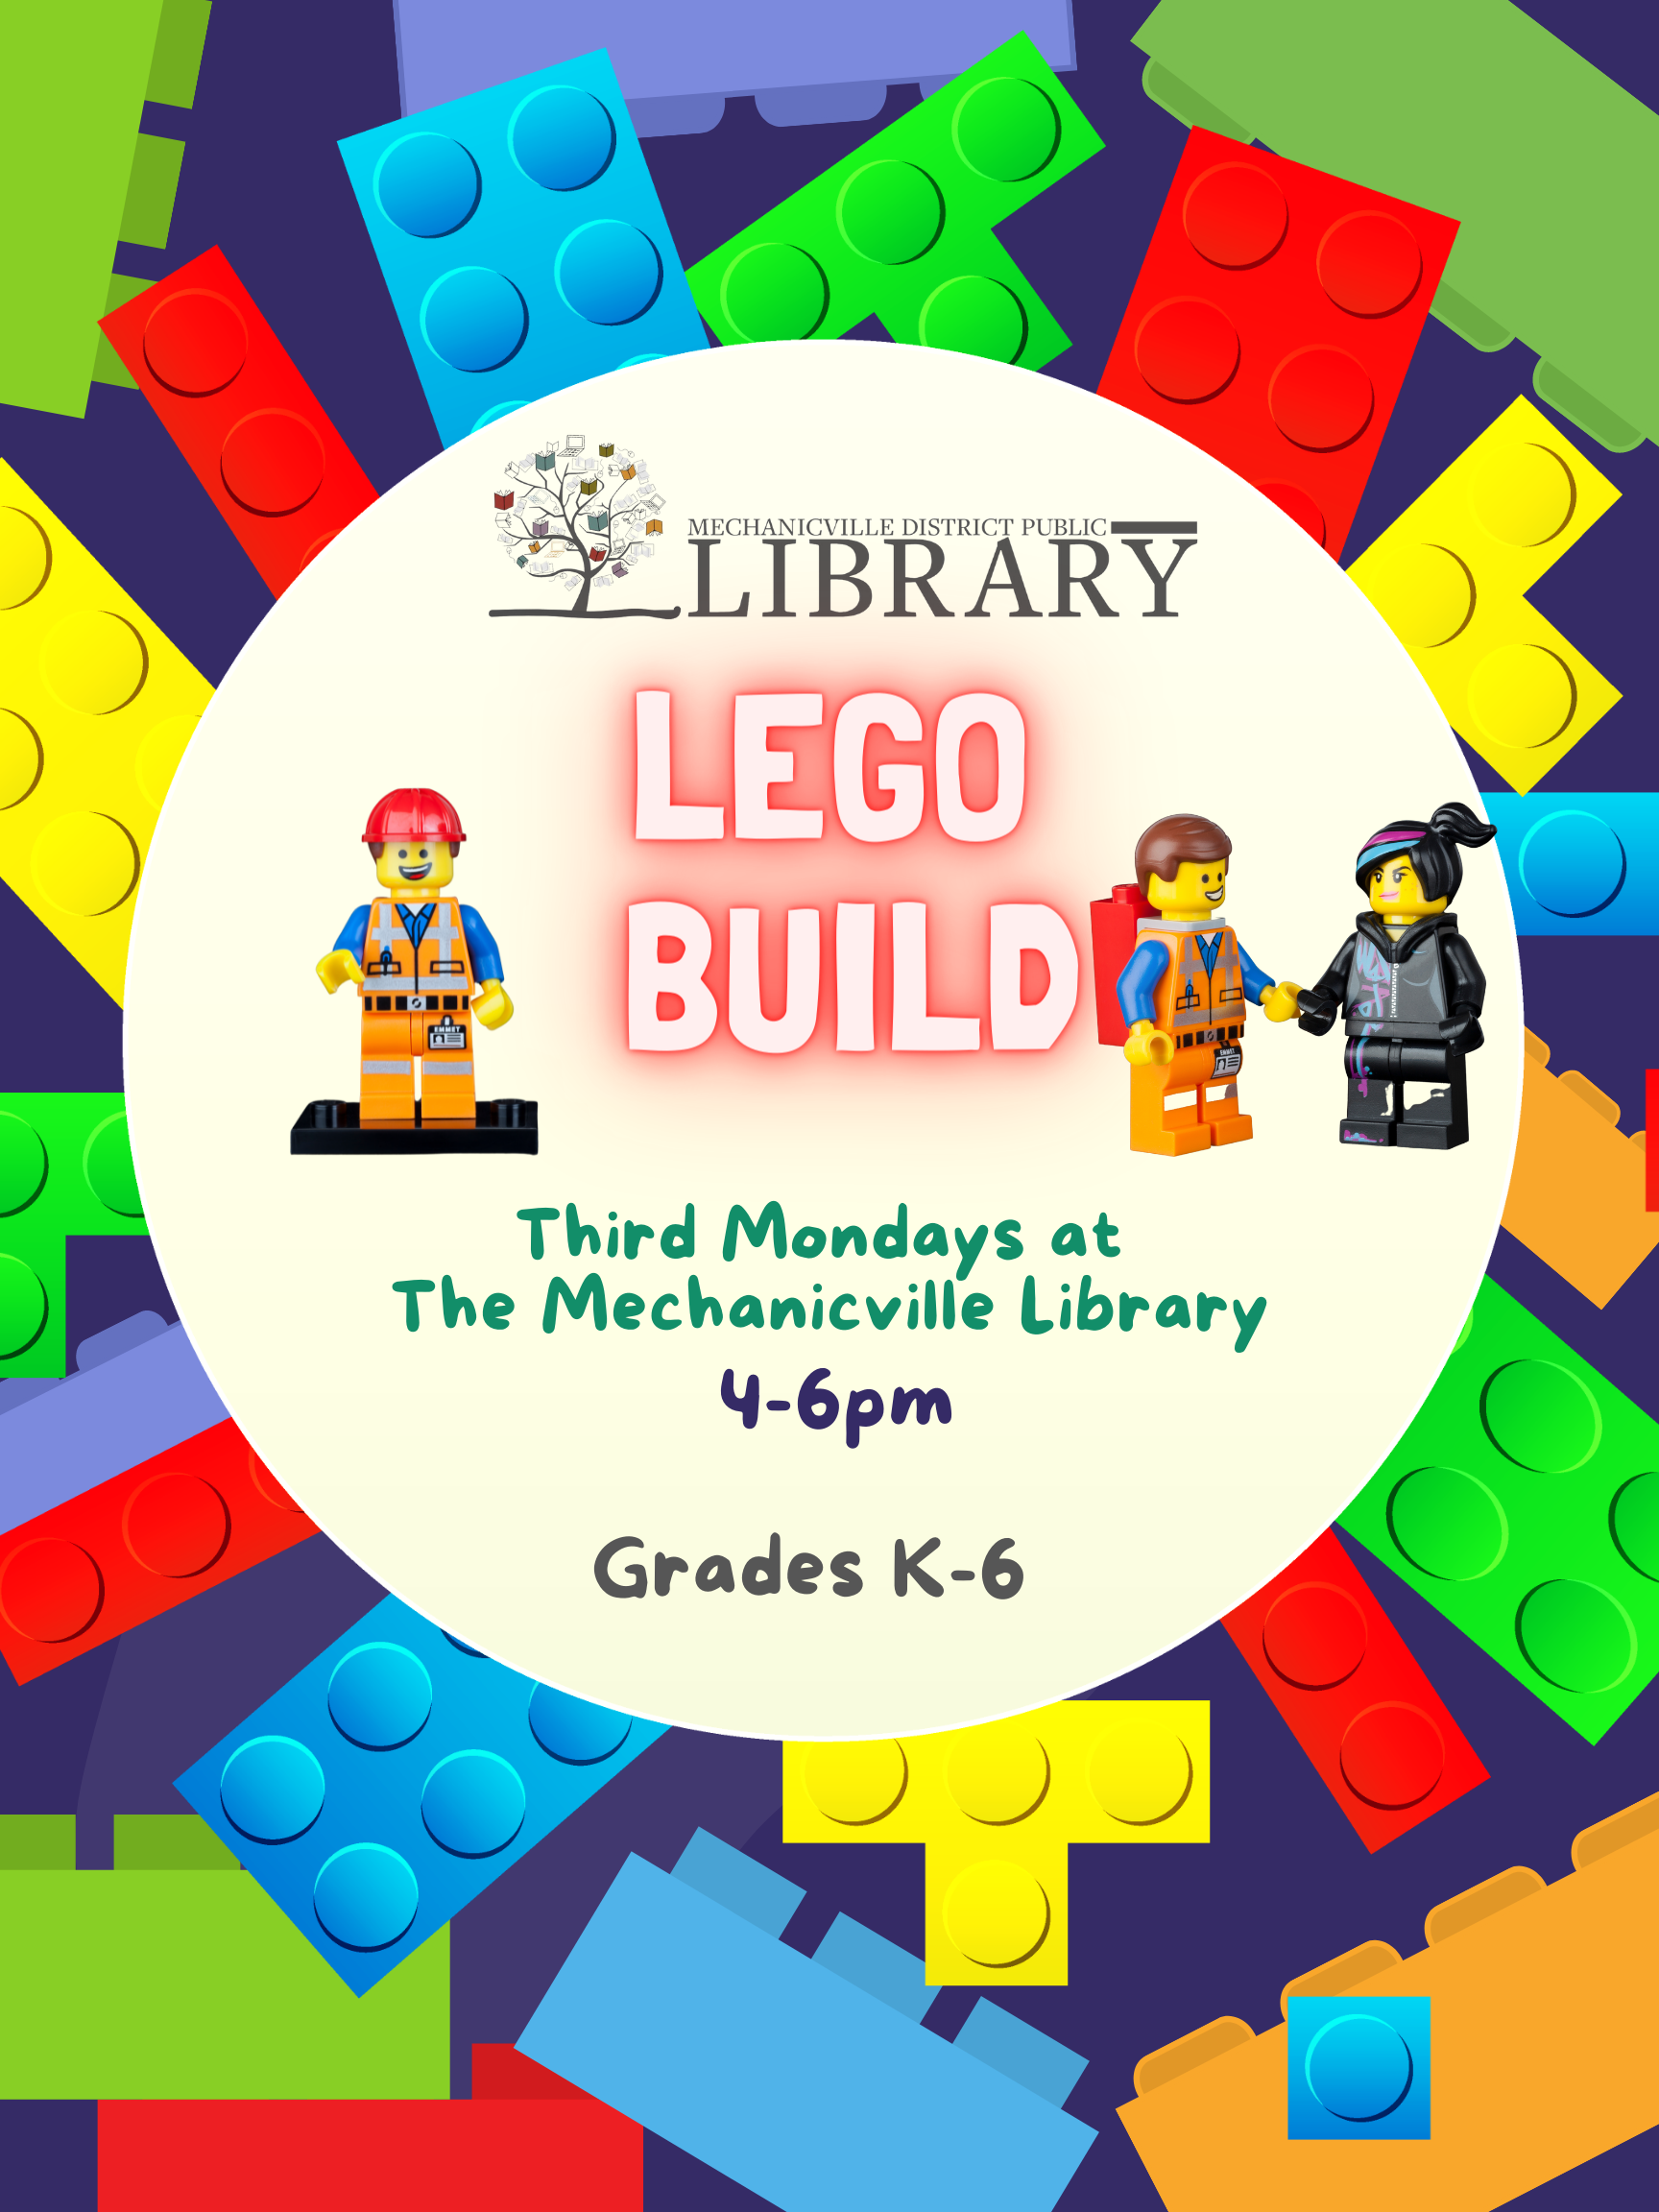 Lego Builders - All are welcome!